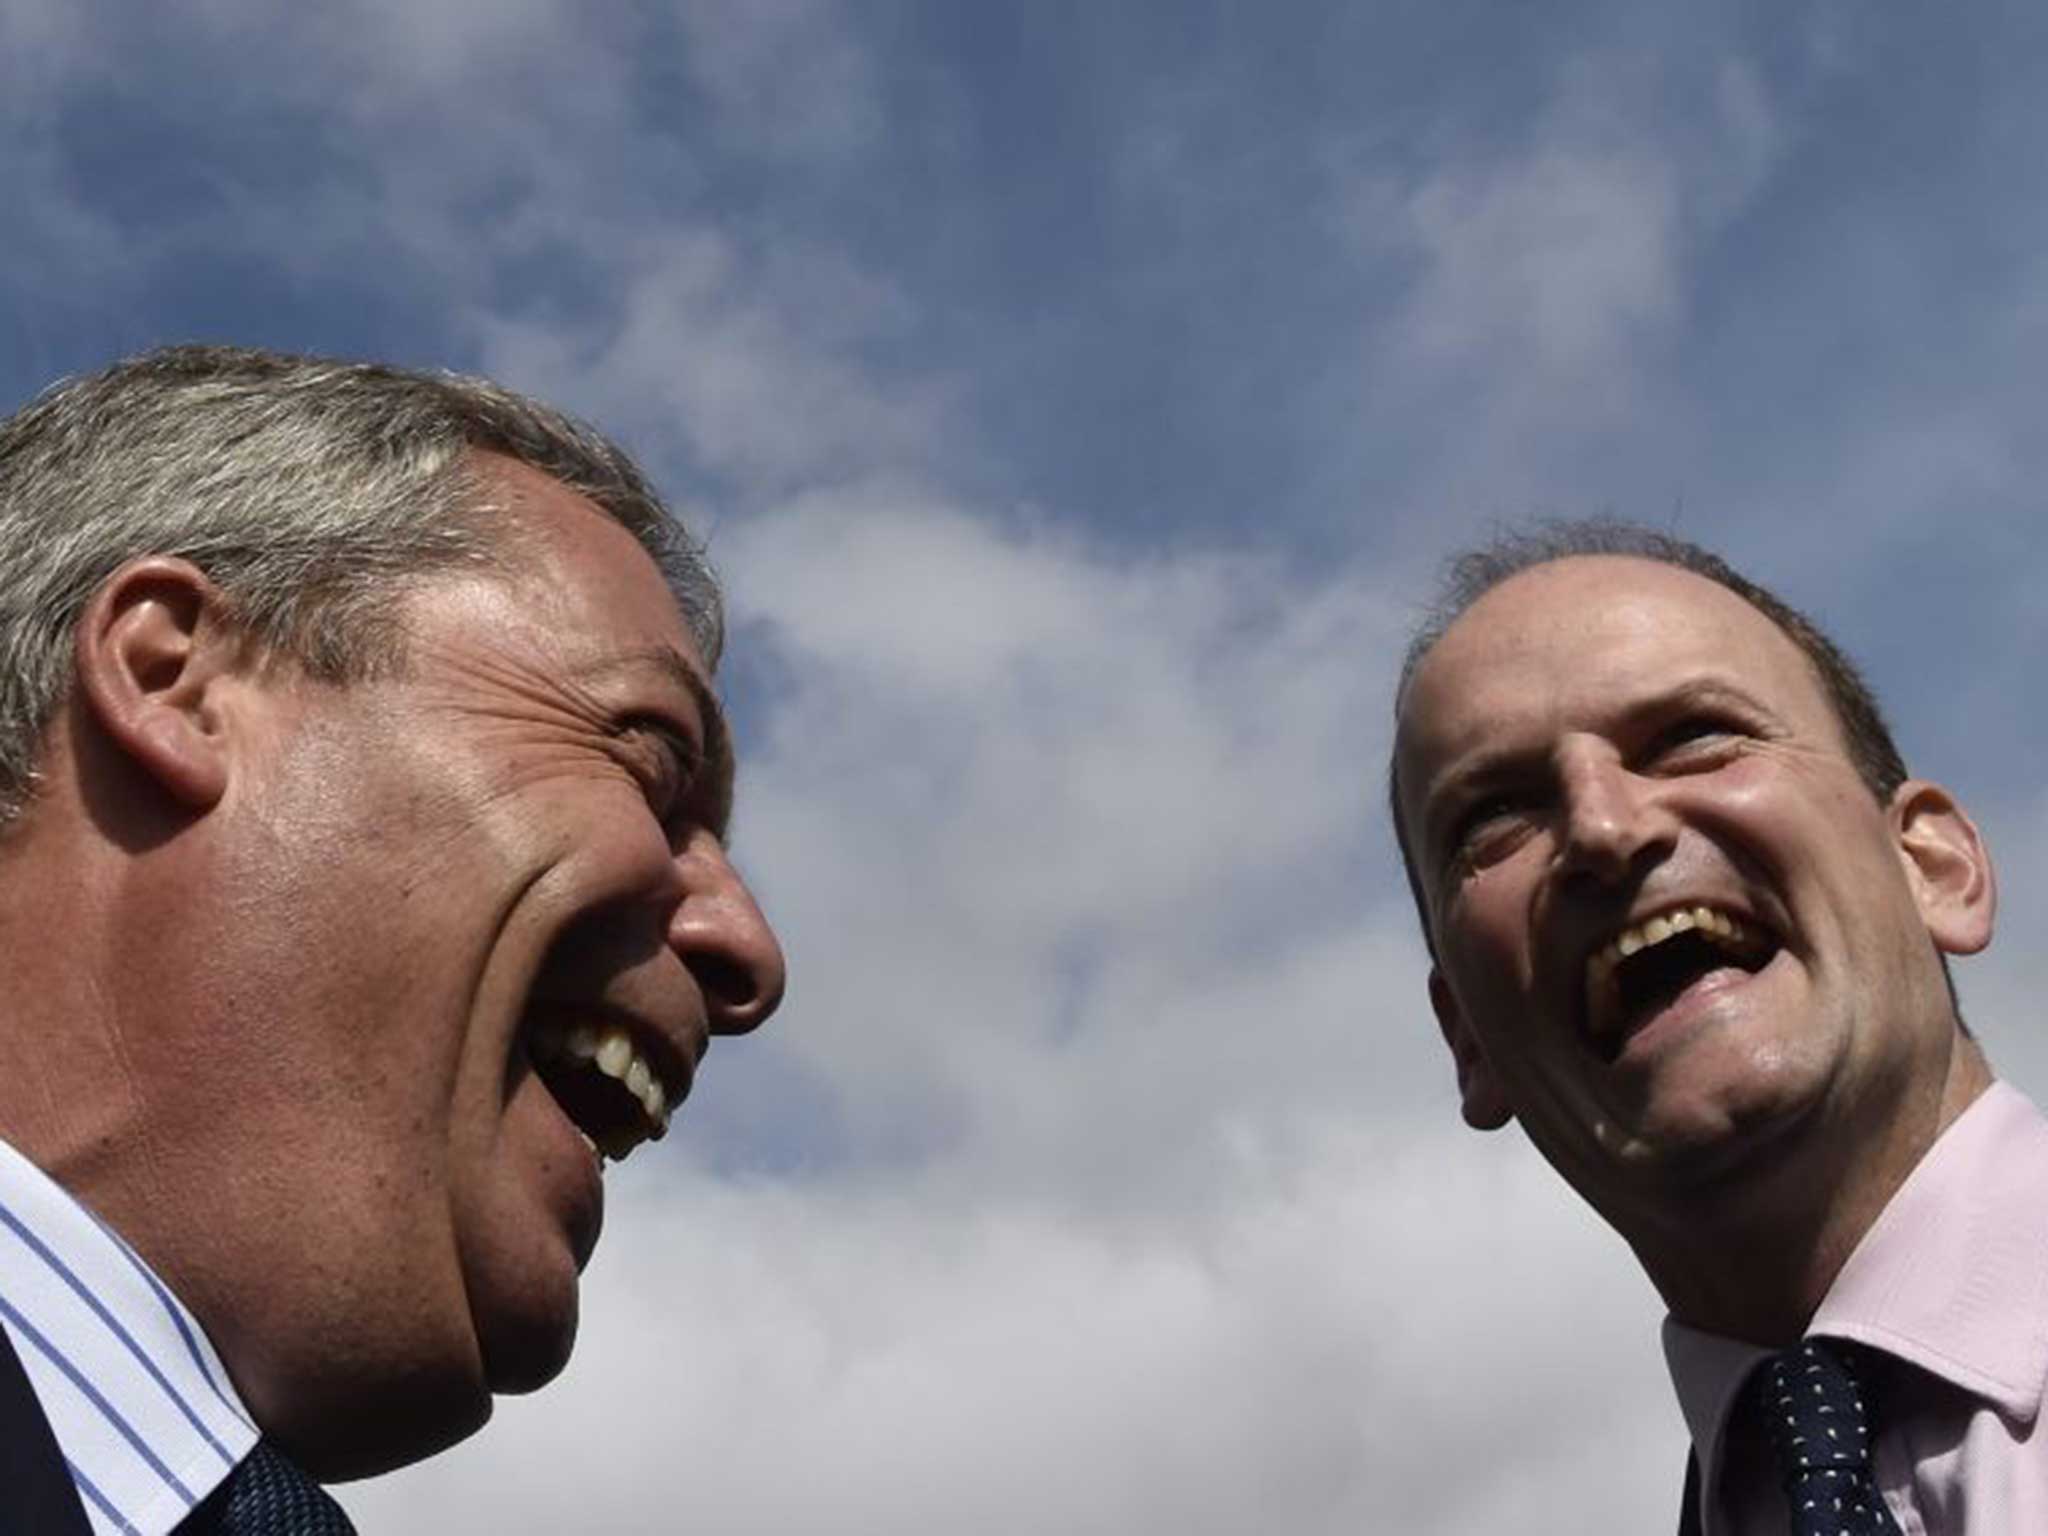 Ukip leader Farage with former Tory MP Carswell, who has defected to his party